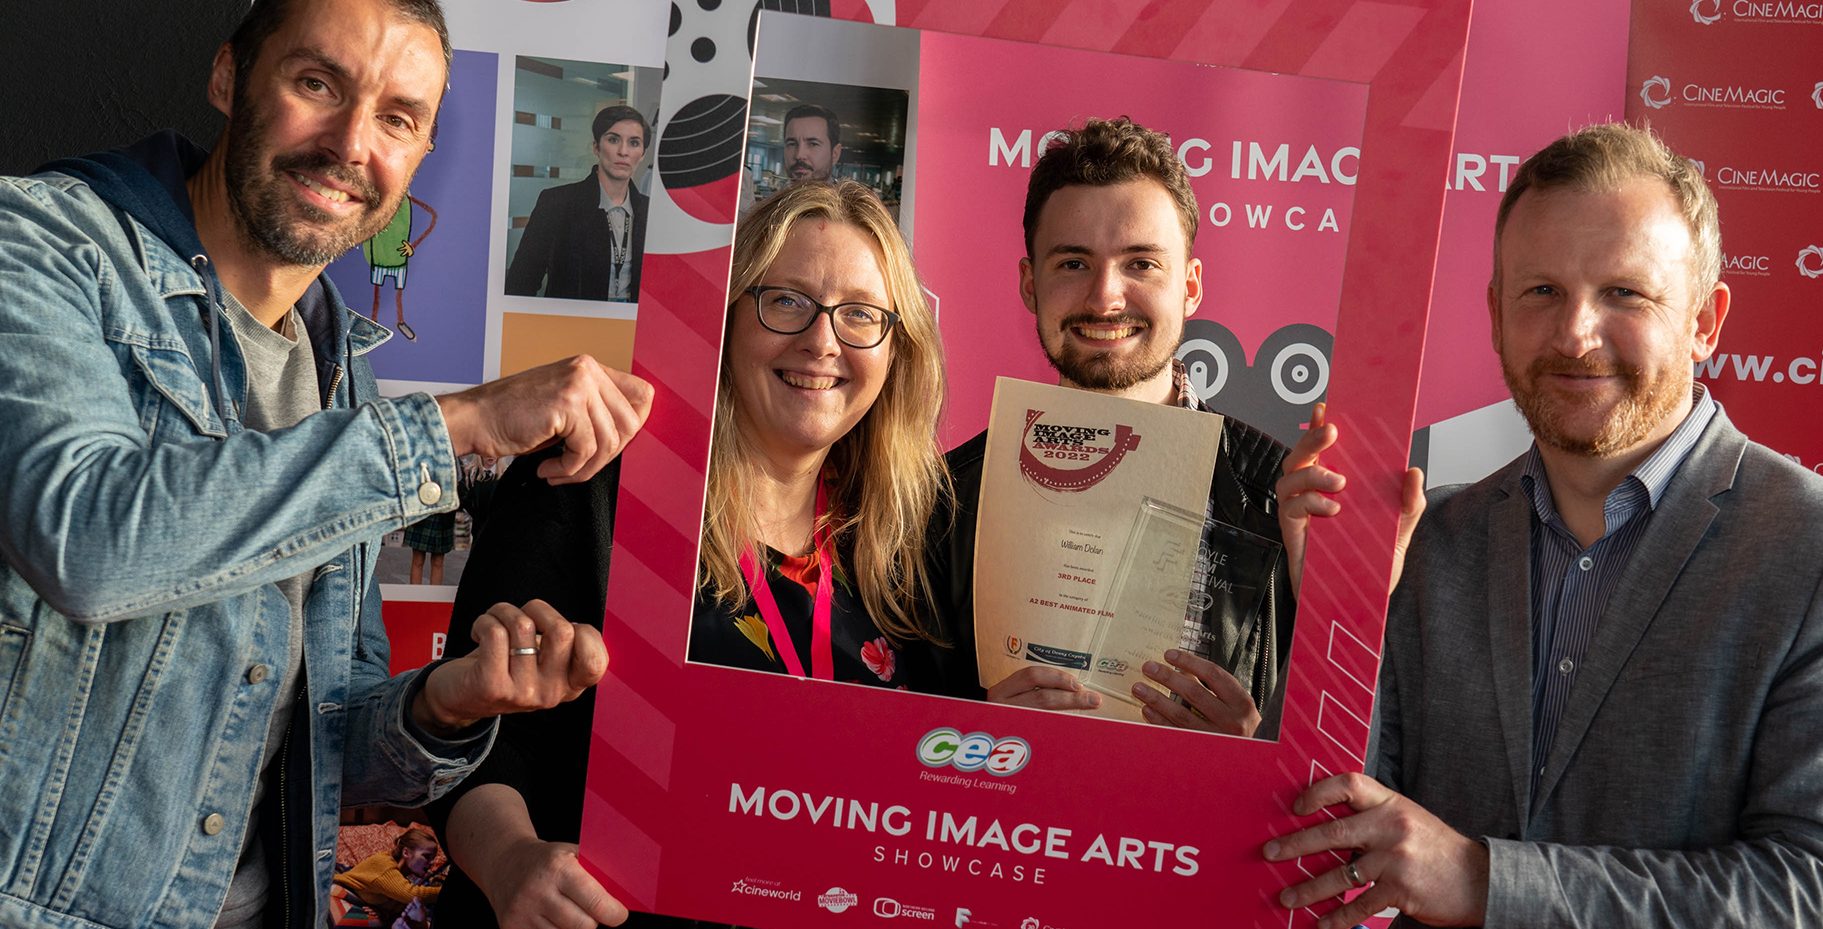 Picture of ALT Animation’s Tim Bryans, CCEA’s Ingrid Arthurs, award winning student William Dolan and NI Screen’s David McConnell.